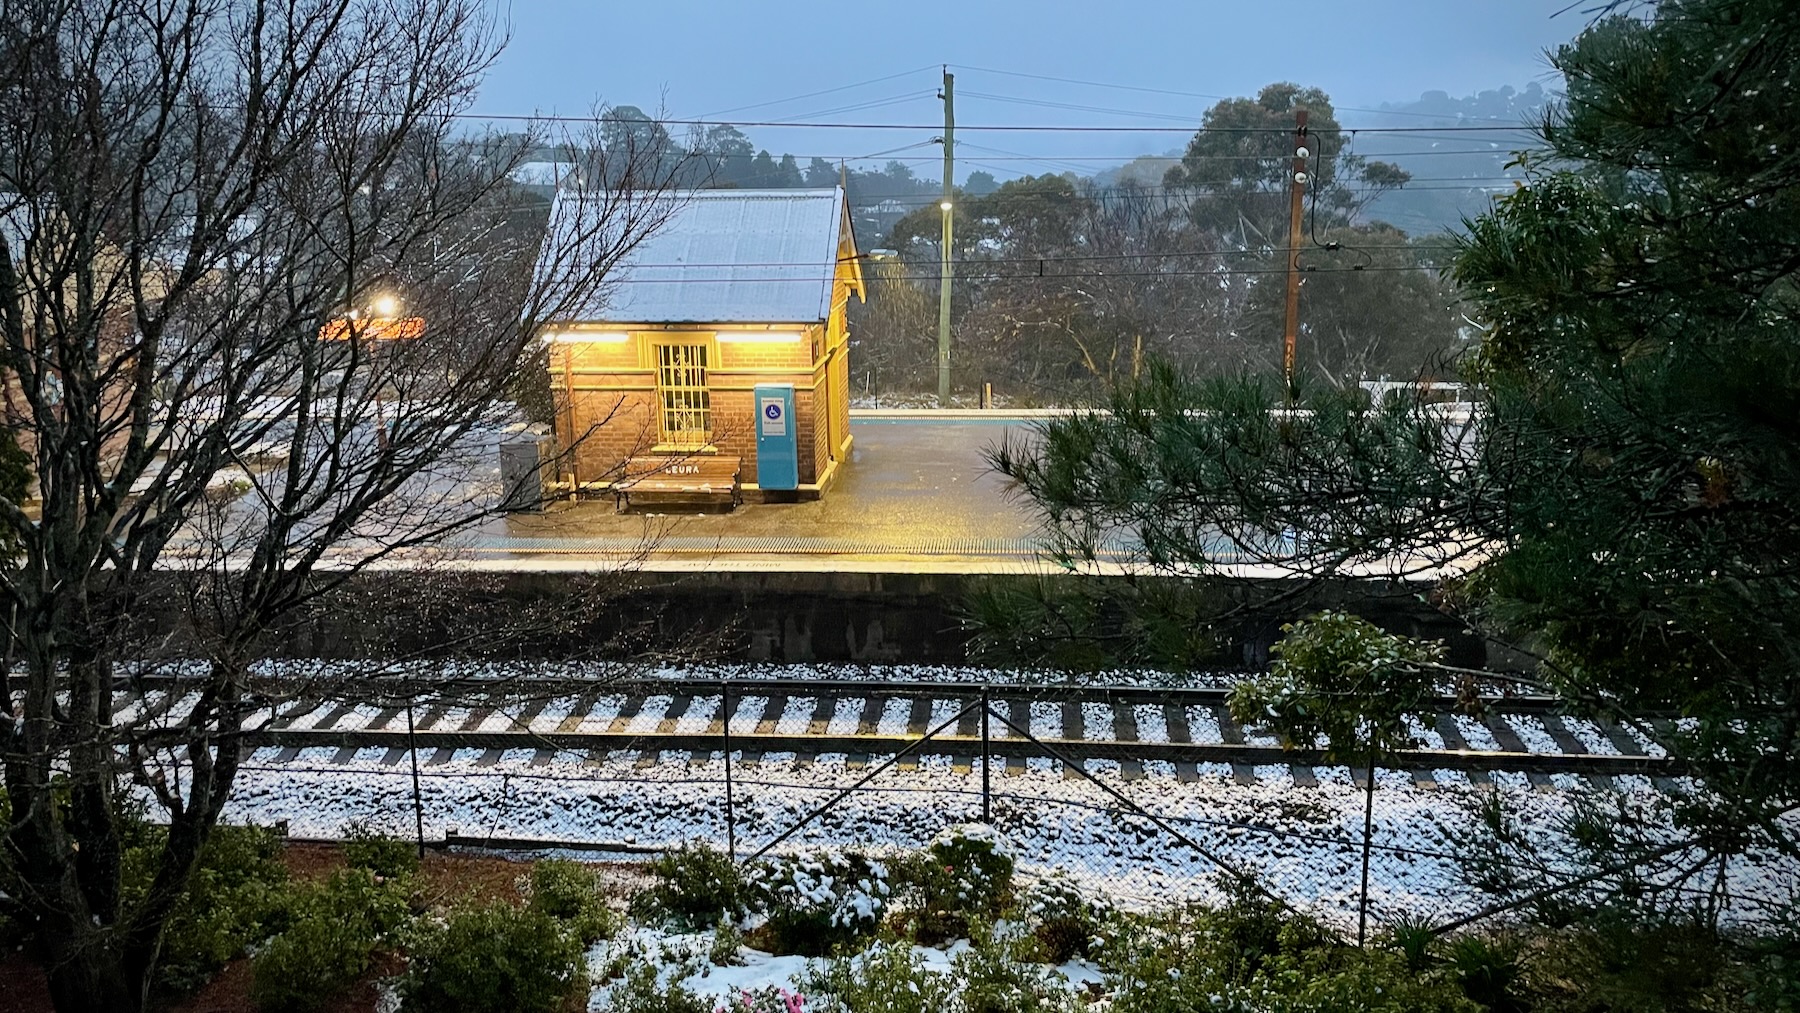 A view downhill in the evening towards a Victorian-era railway station, or at least its equipment hut. The platform is lit up with an orange tinge, but the sky is grey, and snow is scattered along the track.